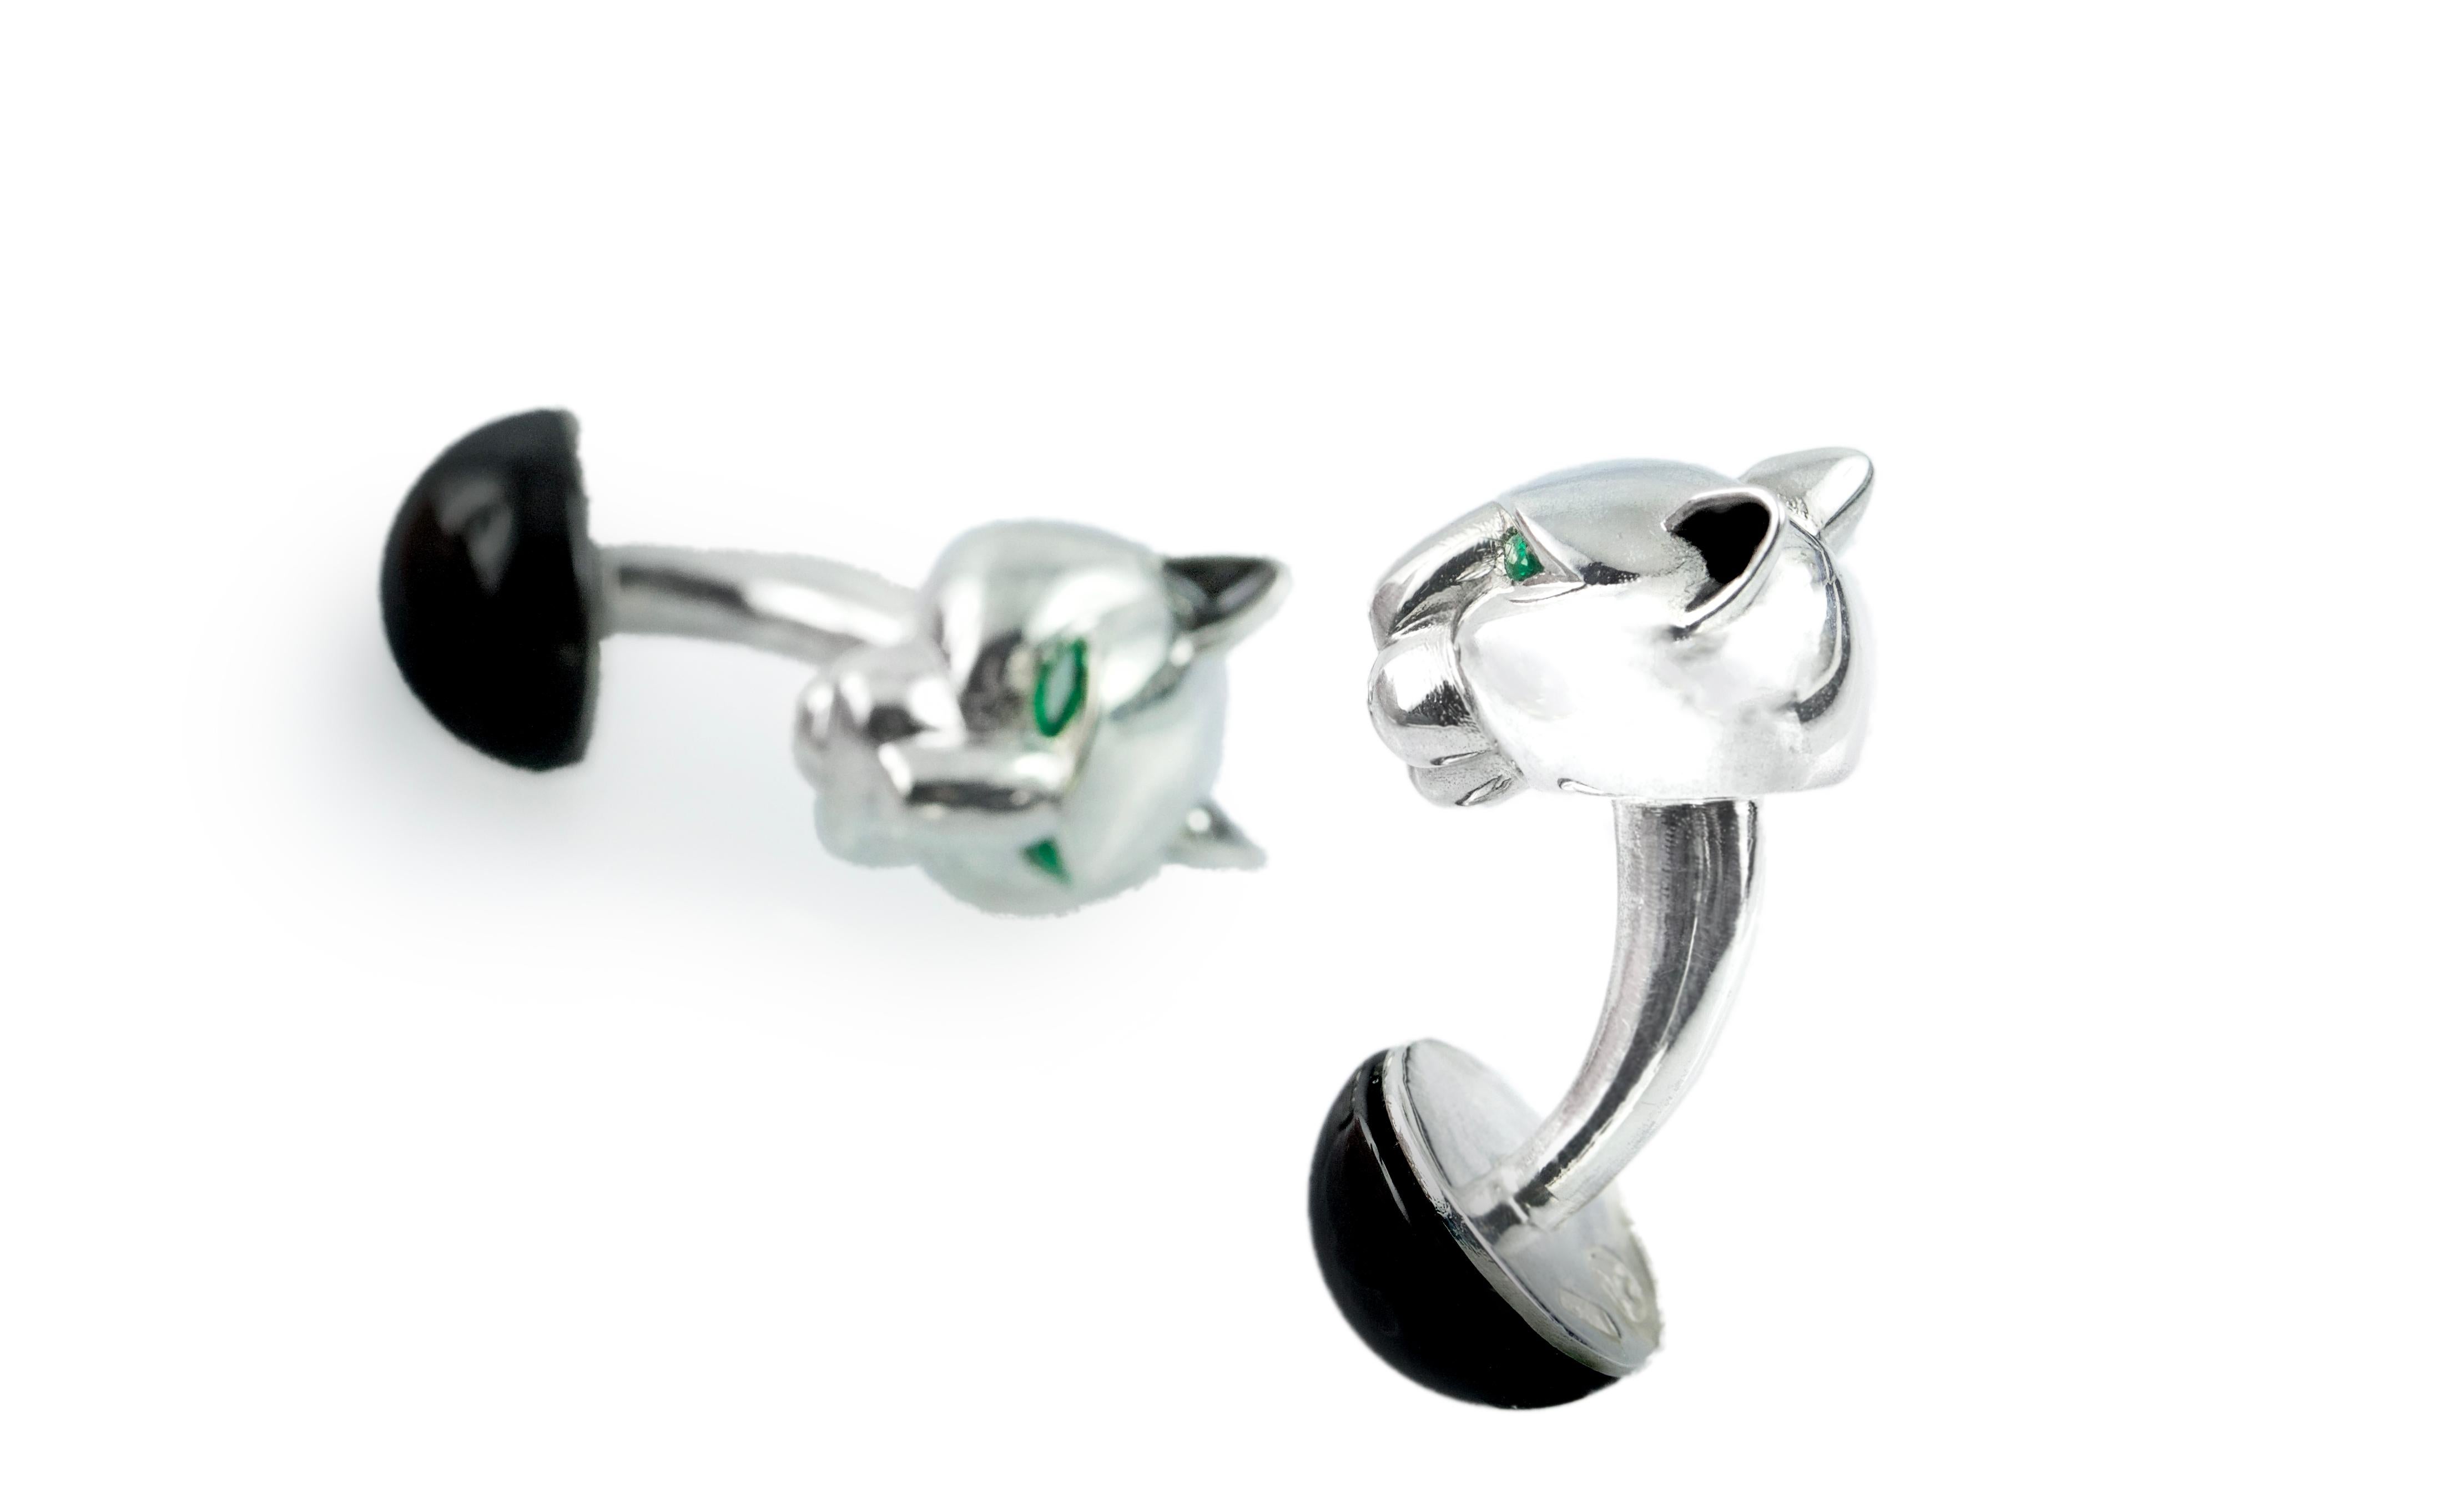 Silver 925 panther cufflinks embellished by emeralds on his eyes and a half sphere in onyx , ears with black enamel.

All AVGVSTA jewelry is new and has never been previously owned or worn. 
Each item will arrive beautifully gift wrapped in a